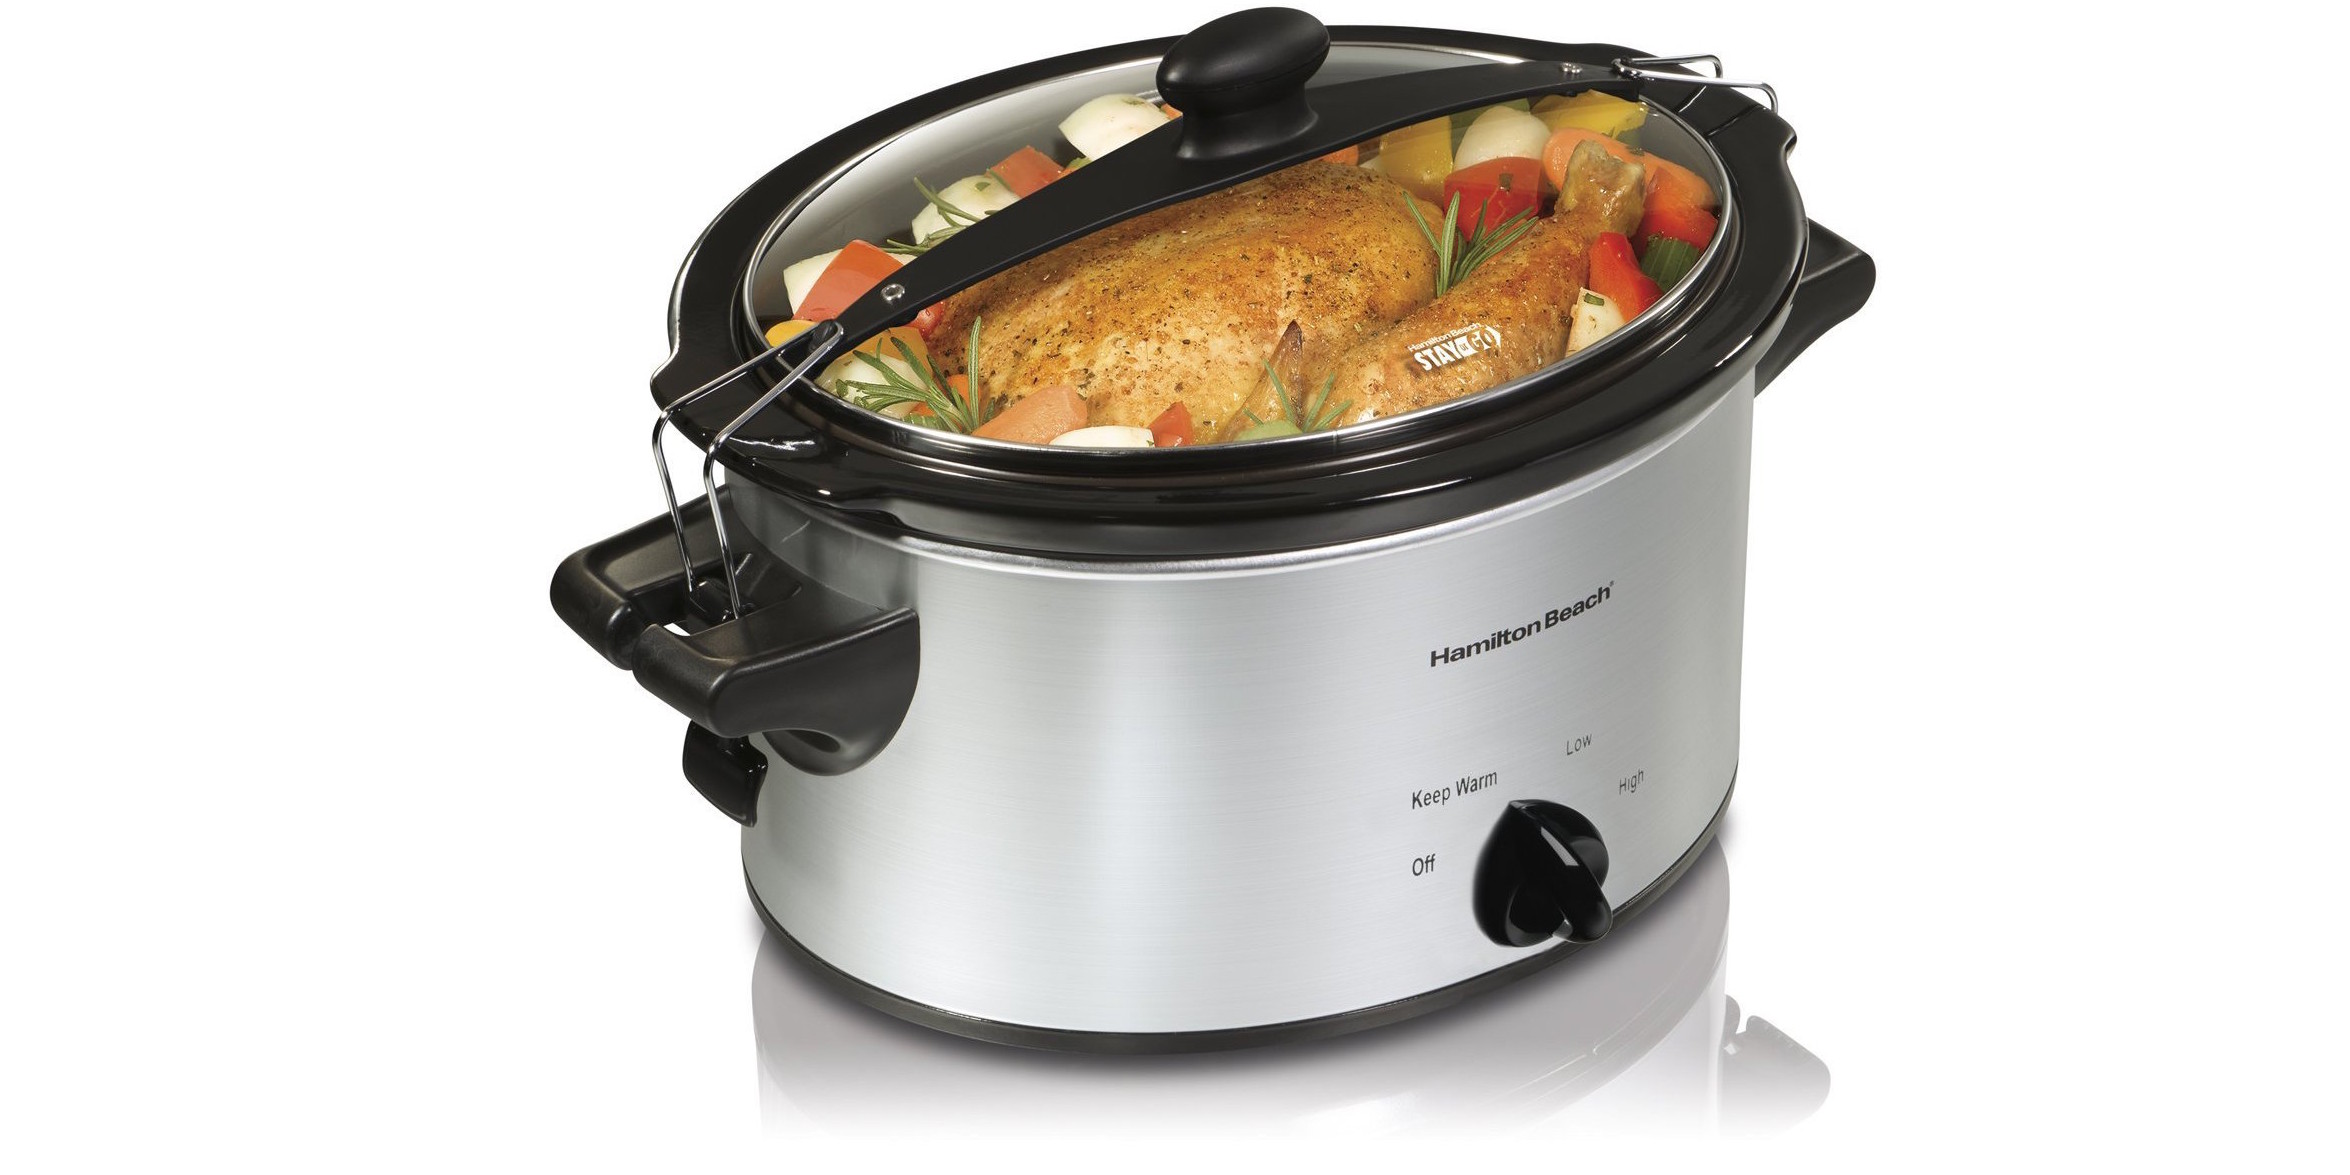 This 2-Quart Crock-Pot Slow Cooker is just $8 at Target today (Reg. up to  $20)